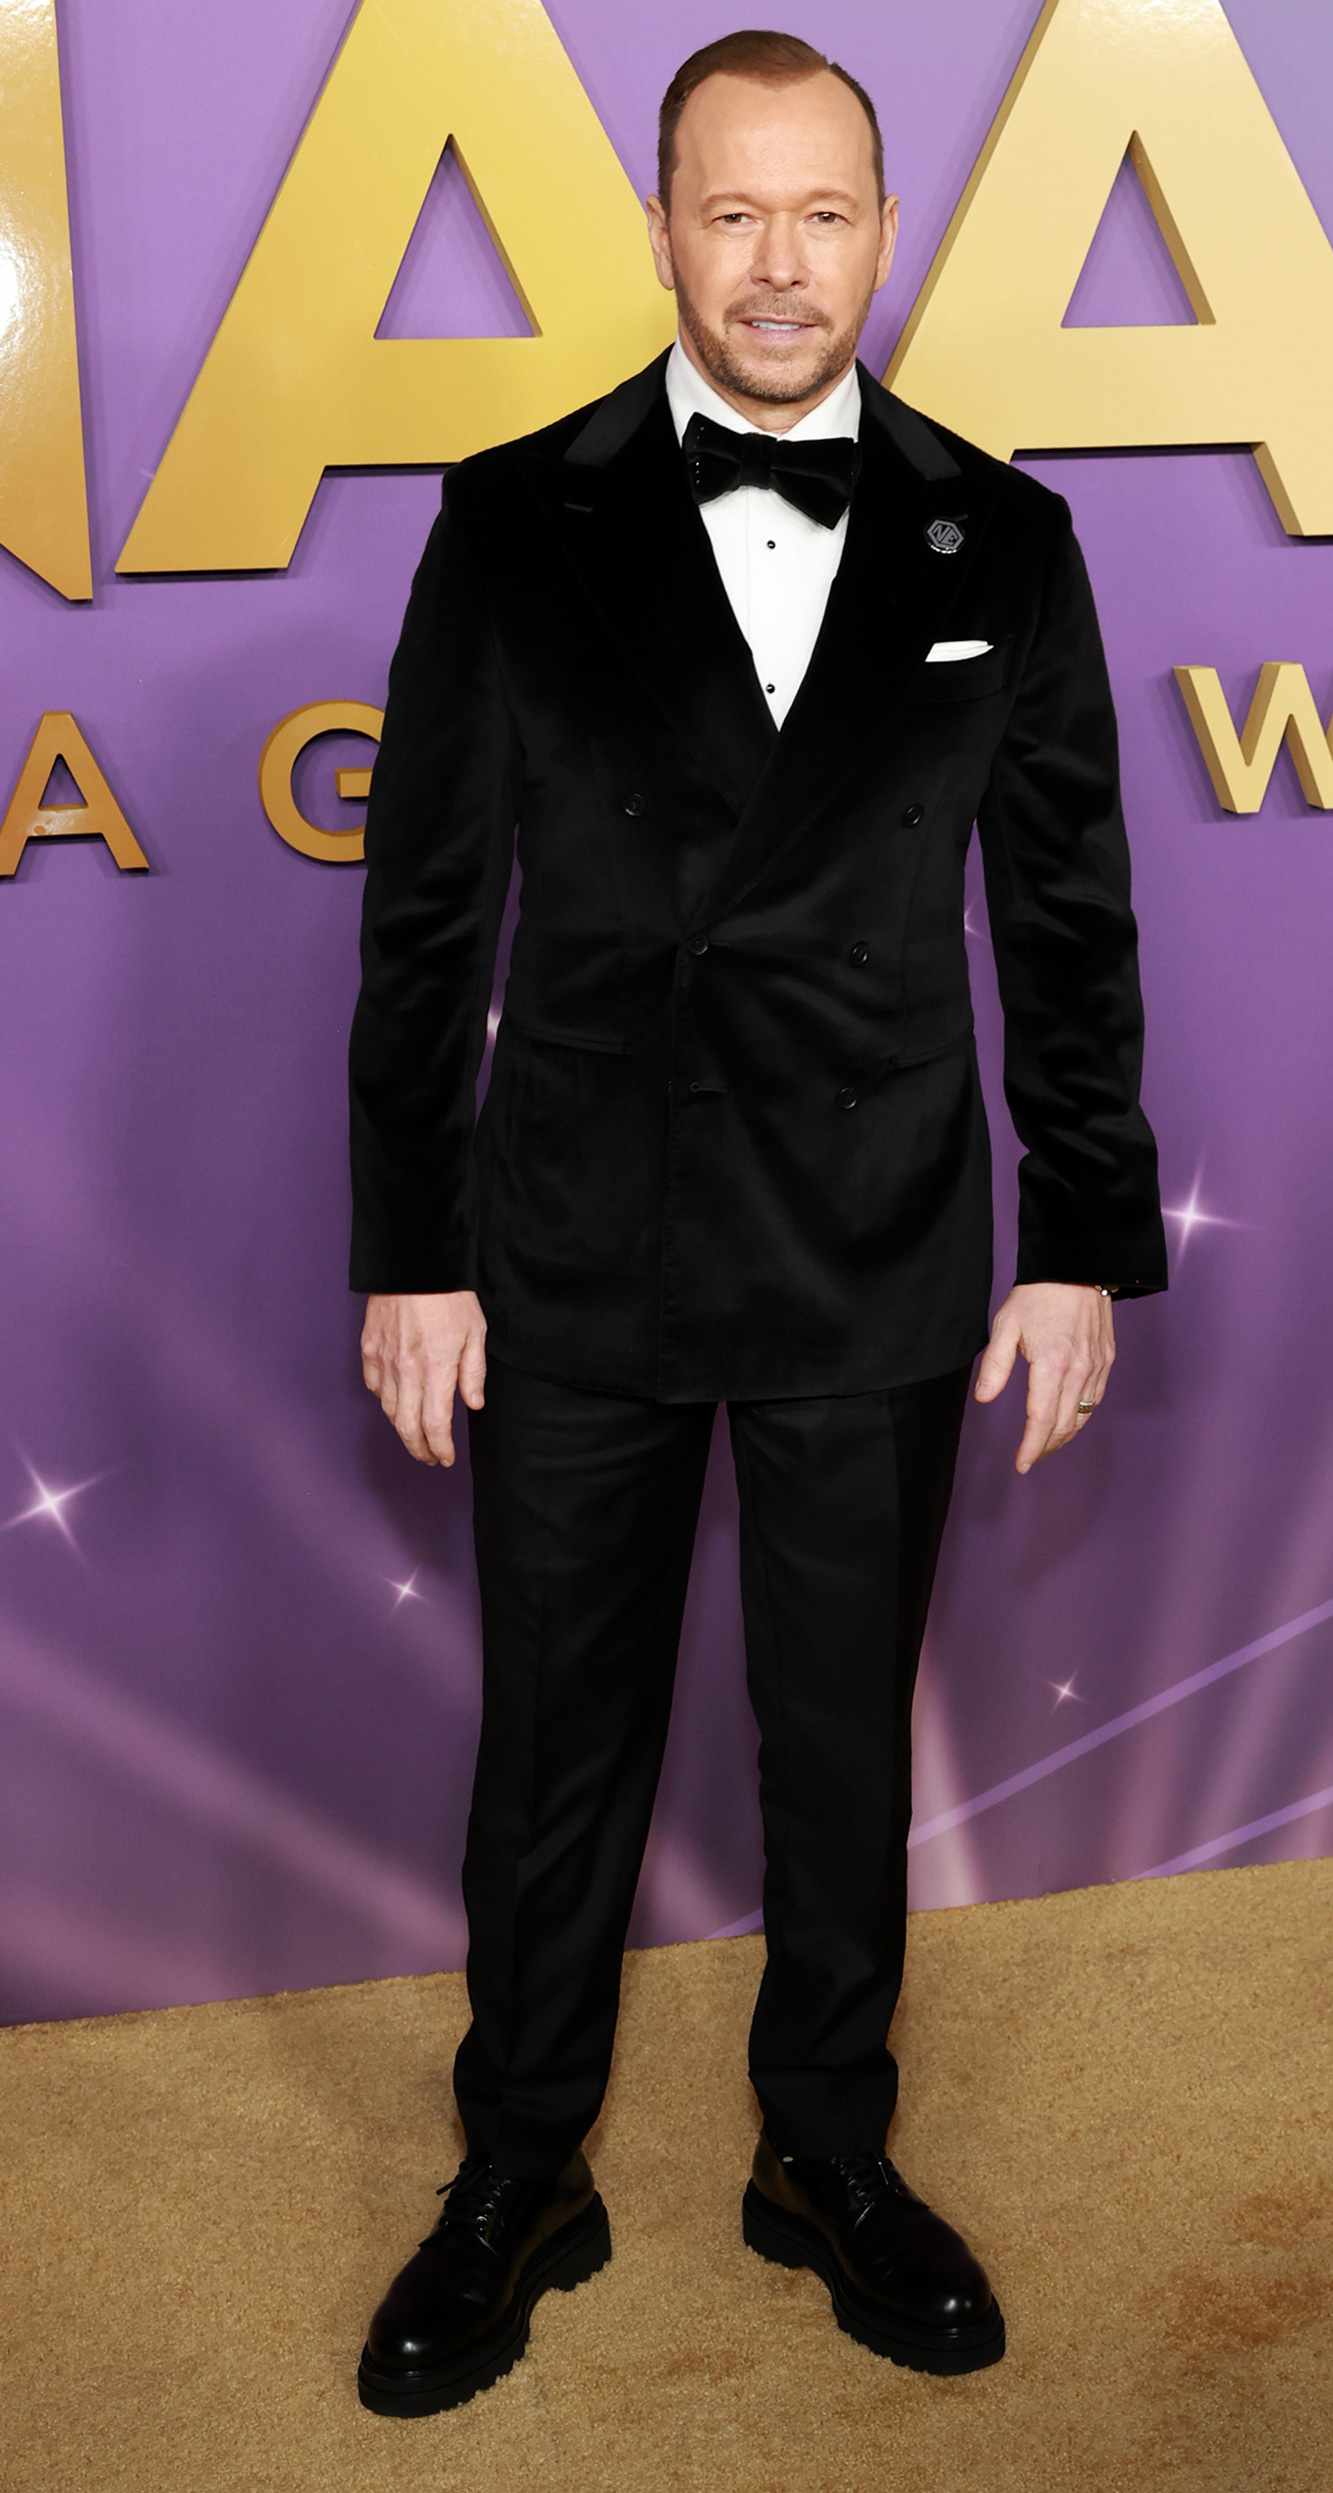 Donnie Wahlberg attends the 55th Annual NAACP Awards